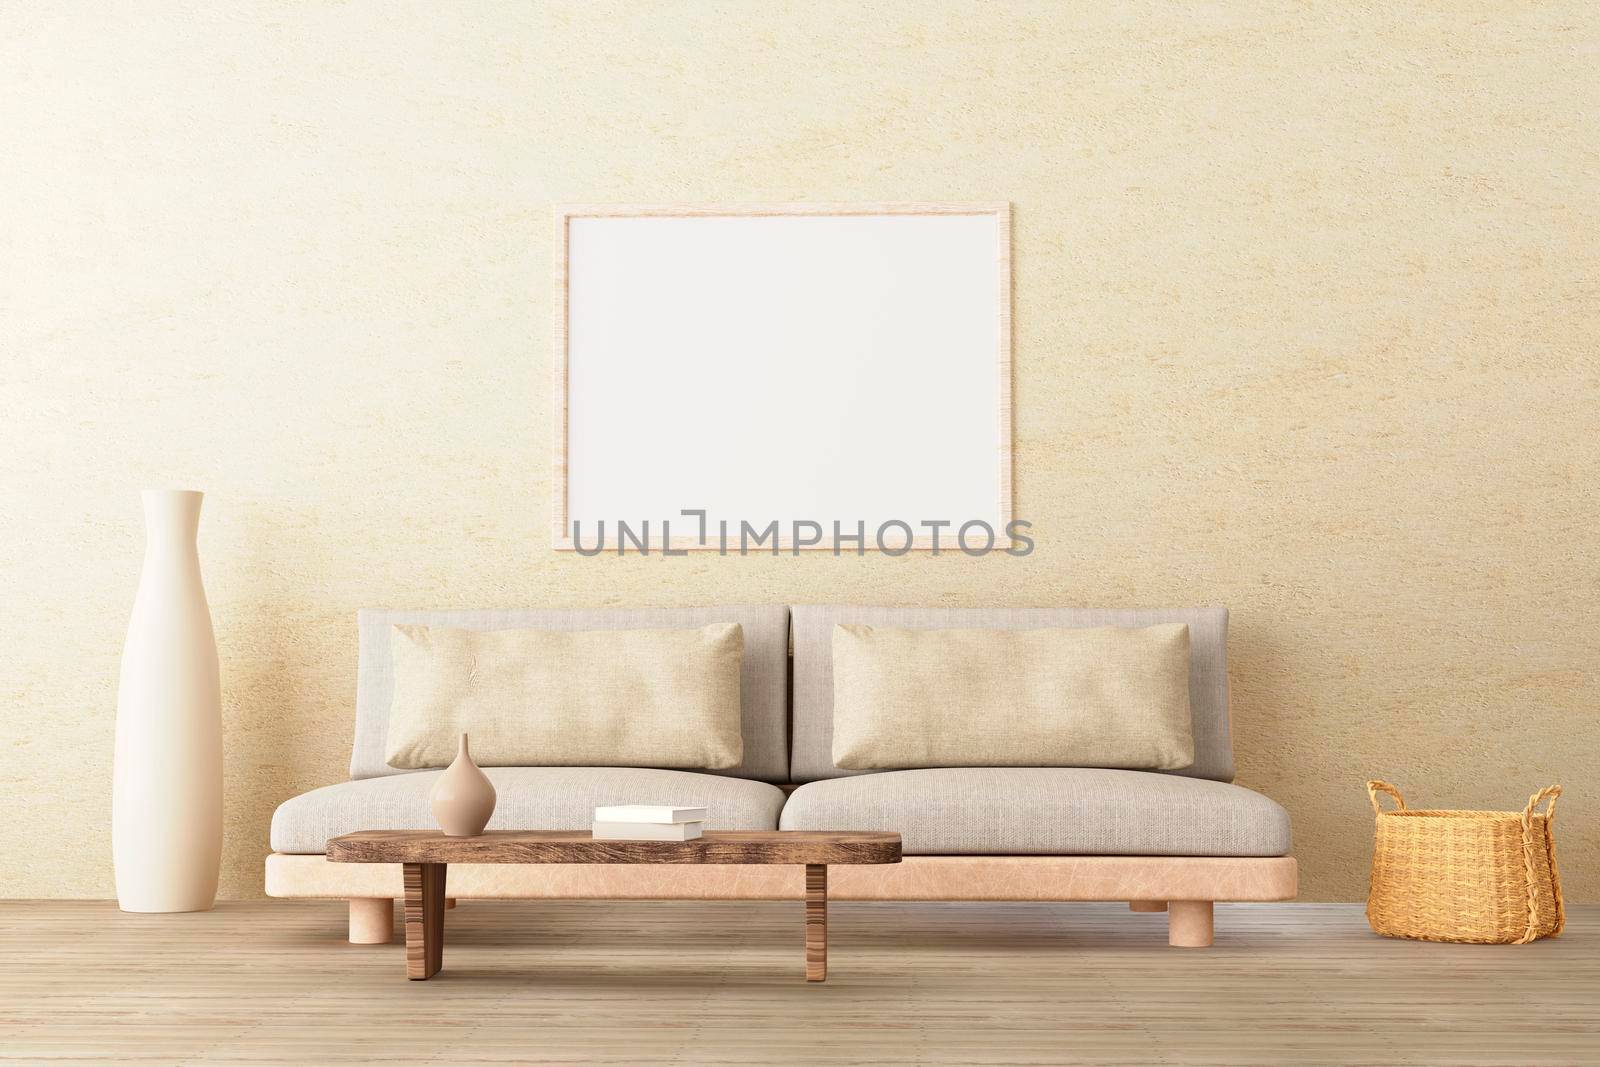 Vertical poster mockup in neutral style interior living room with low sofa, ceramic jug, side table, wicker basket and books on empty concrete wall background. 3d illustration. by raferto1973